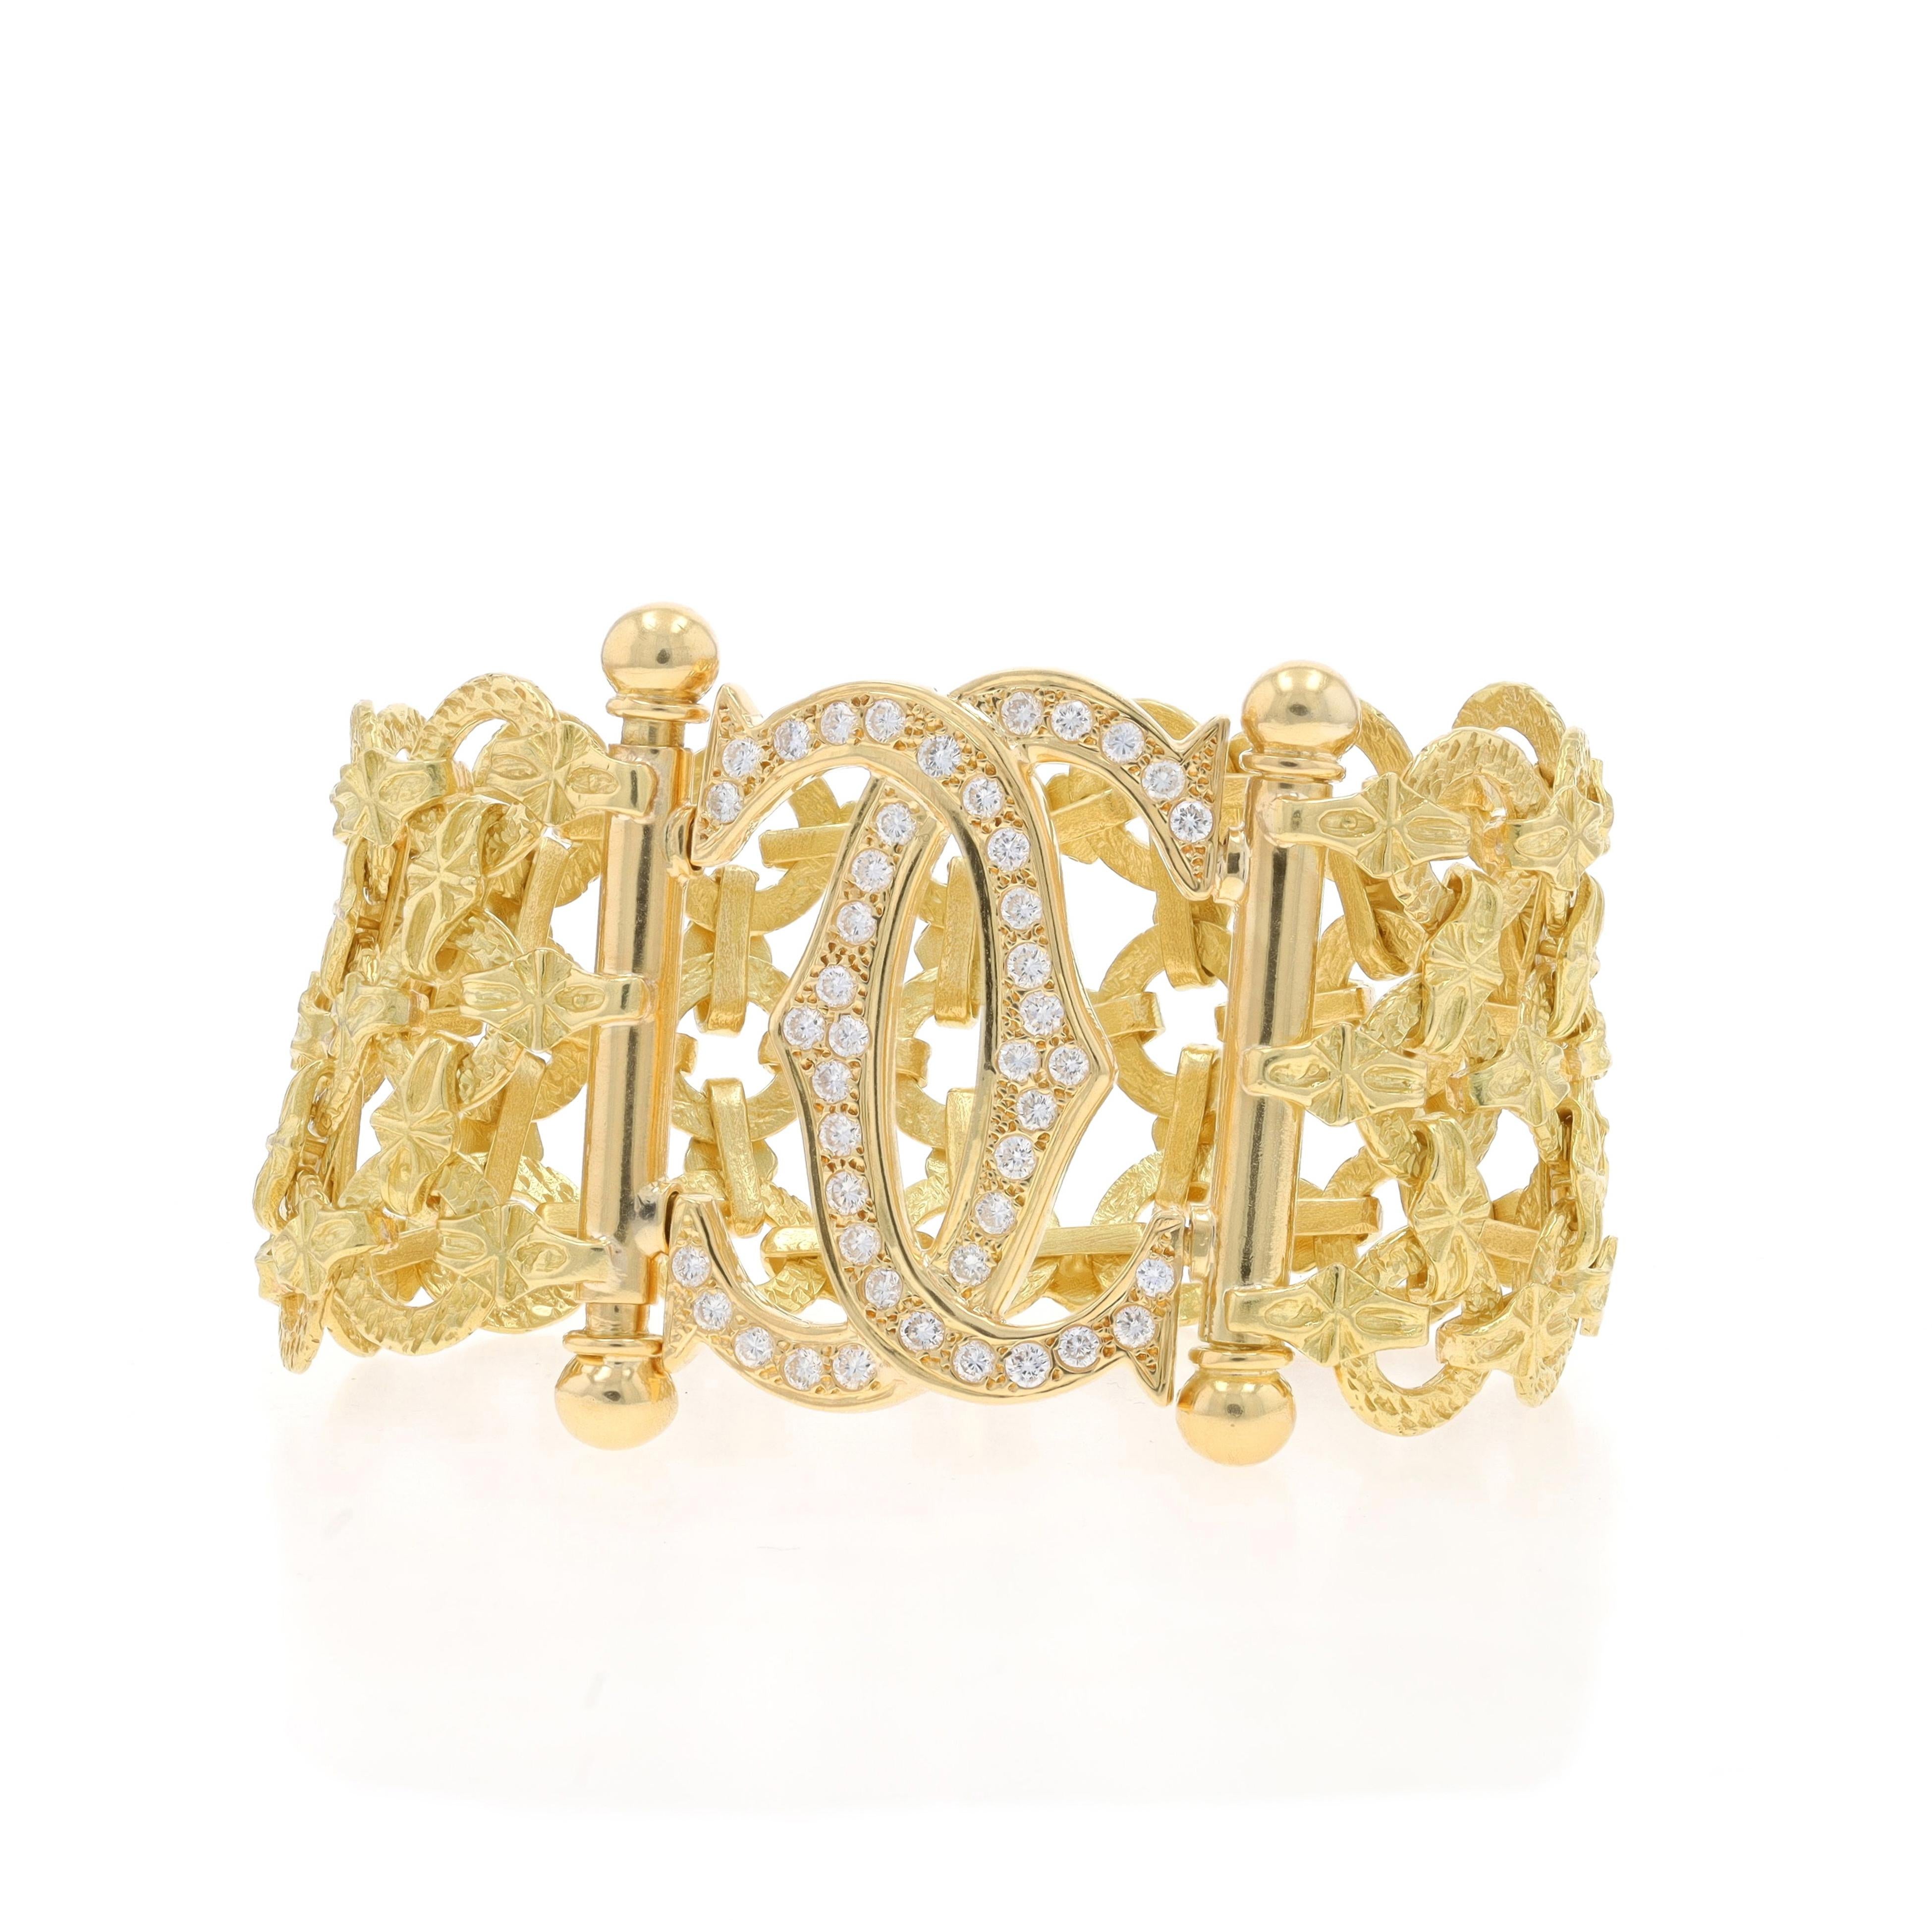 Metal Content: 18k Yellow Gold

Stone Information

Natural Diamonds
Carat(s): 1.32ctw
Cut: Round Brilliant
Color: E - F
Clarity: VS1 - VS2

Total Carats: 1.32ctw

Style: Chain Link
Fastening Type: Locking Snap Clasp
Theme: Double C, Initials